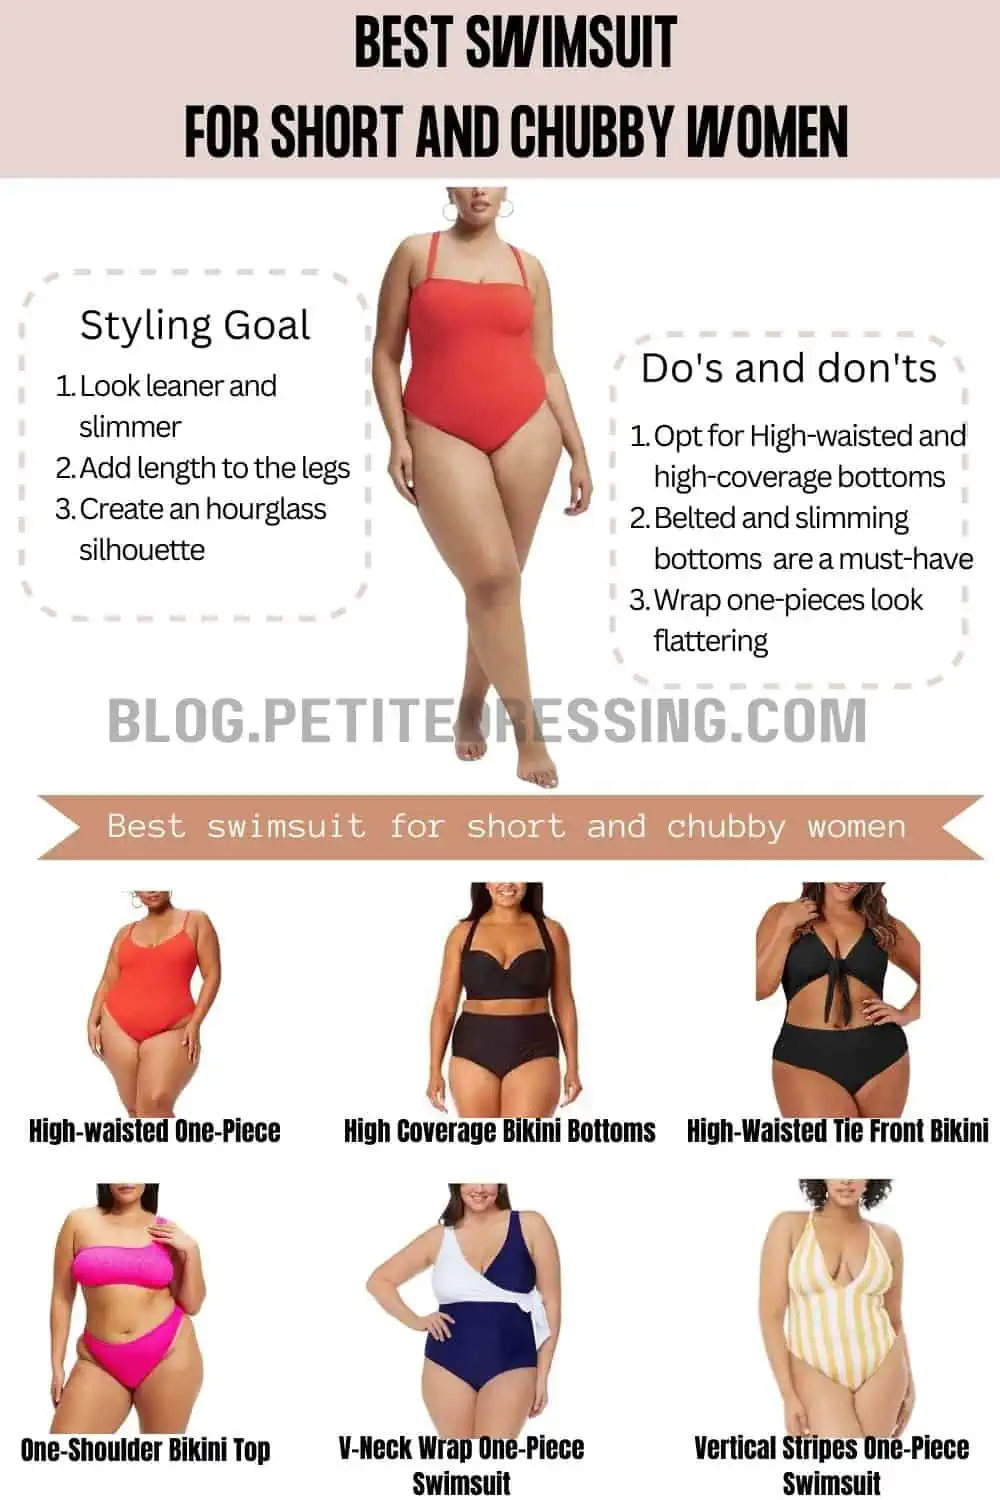 The Complete Swimsuit Guide for Short and Chubby Women - Petite Dressing